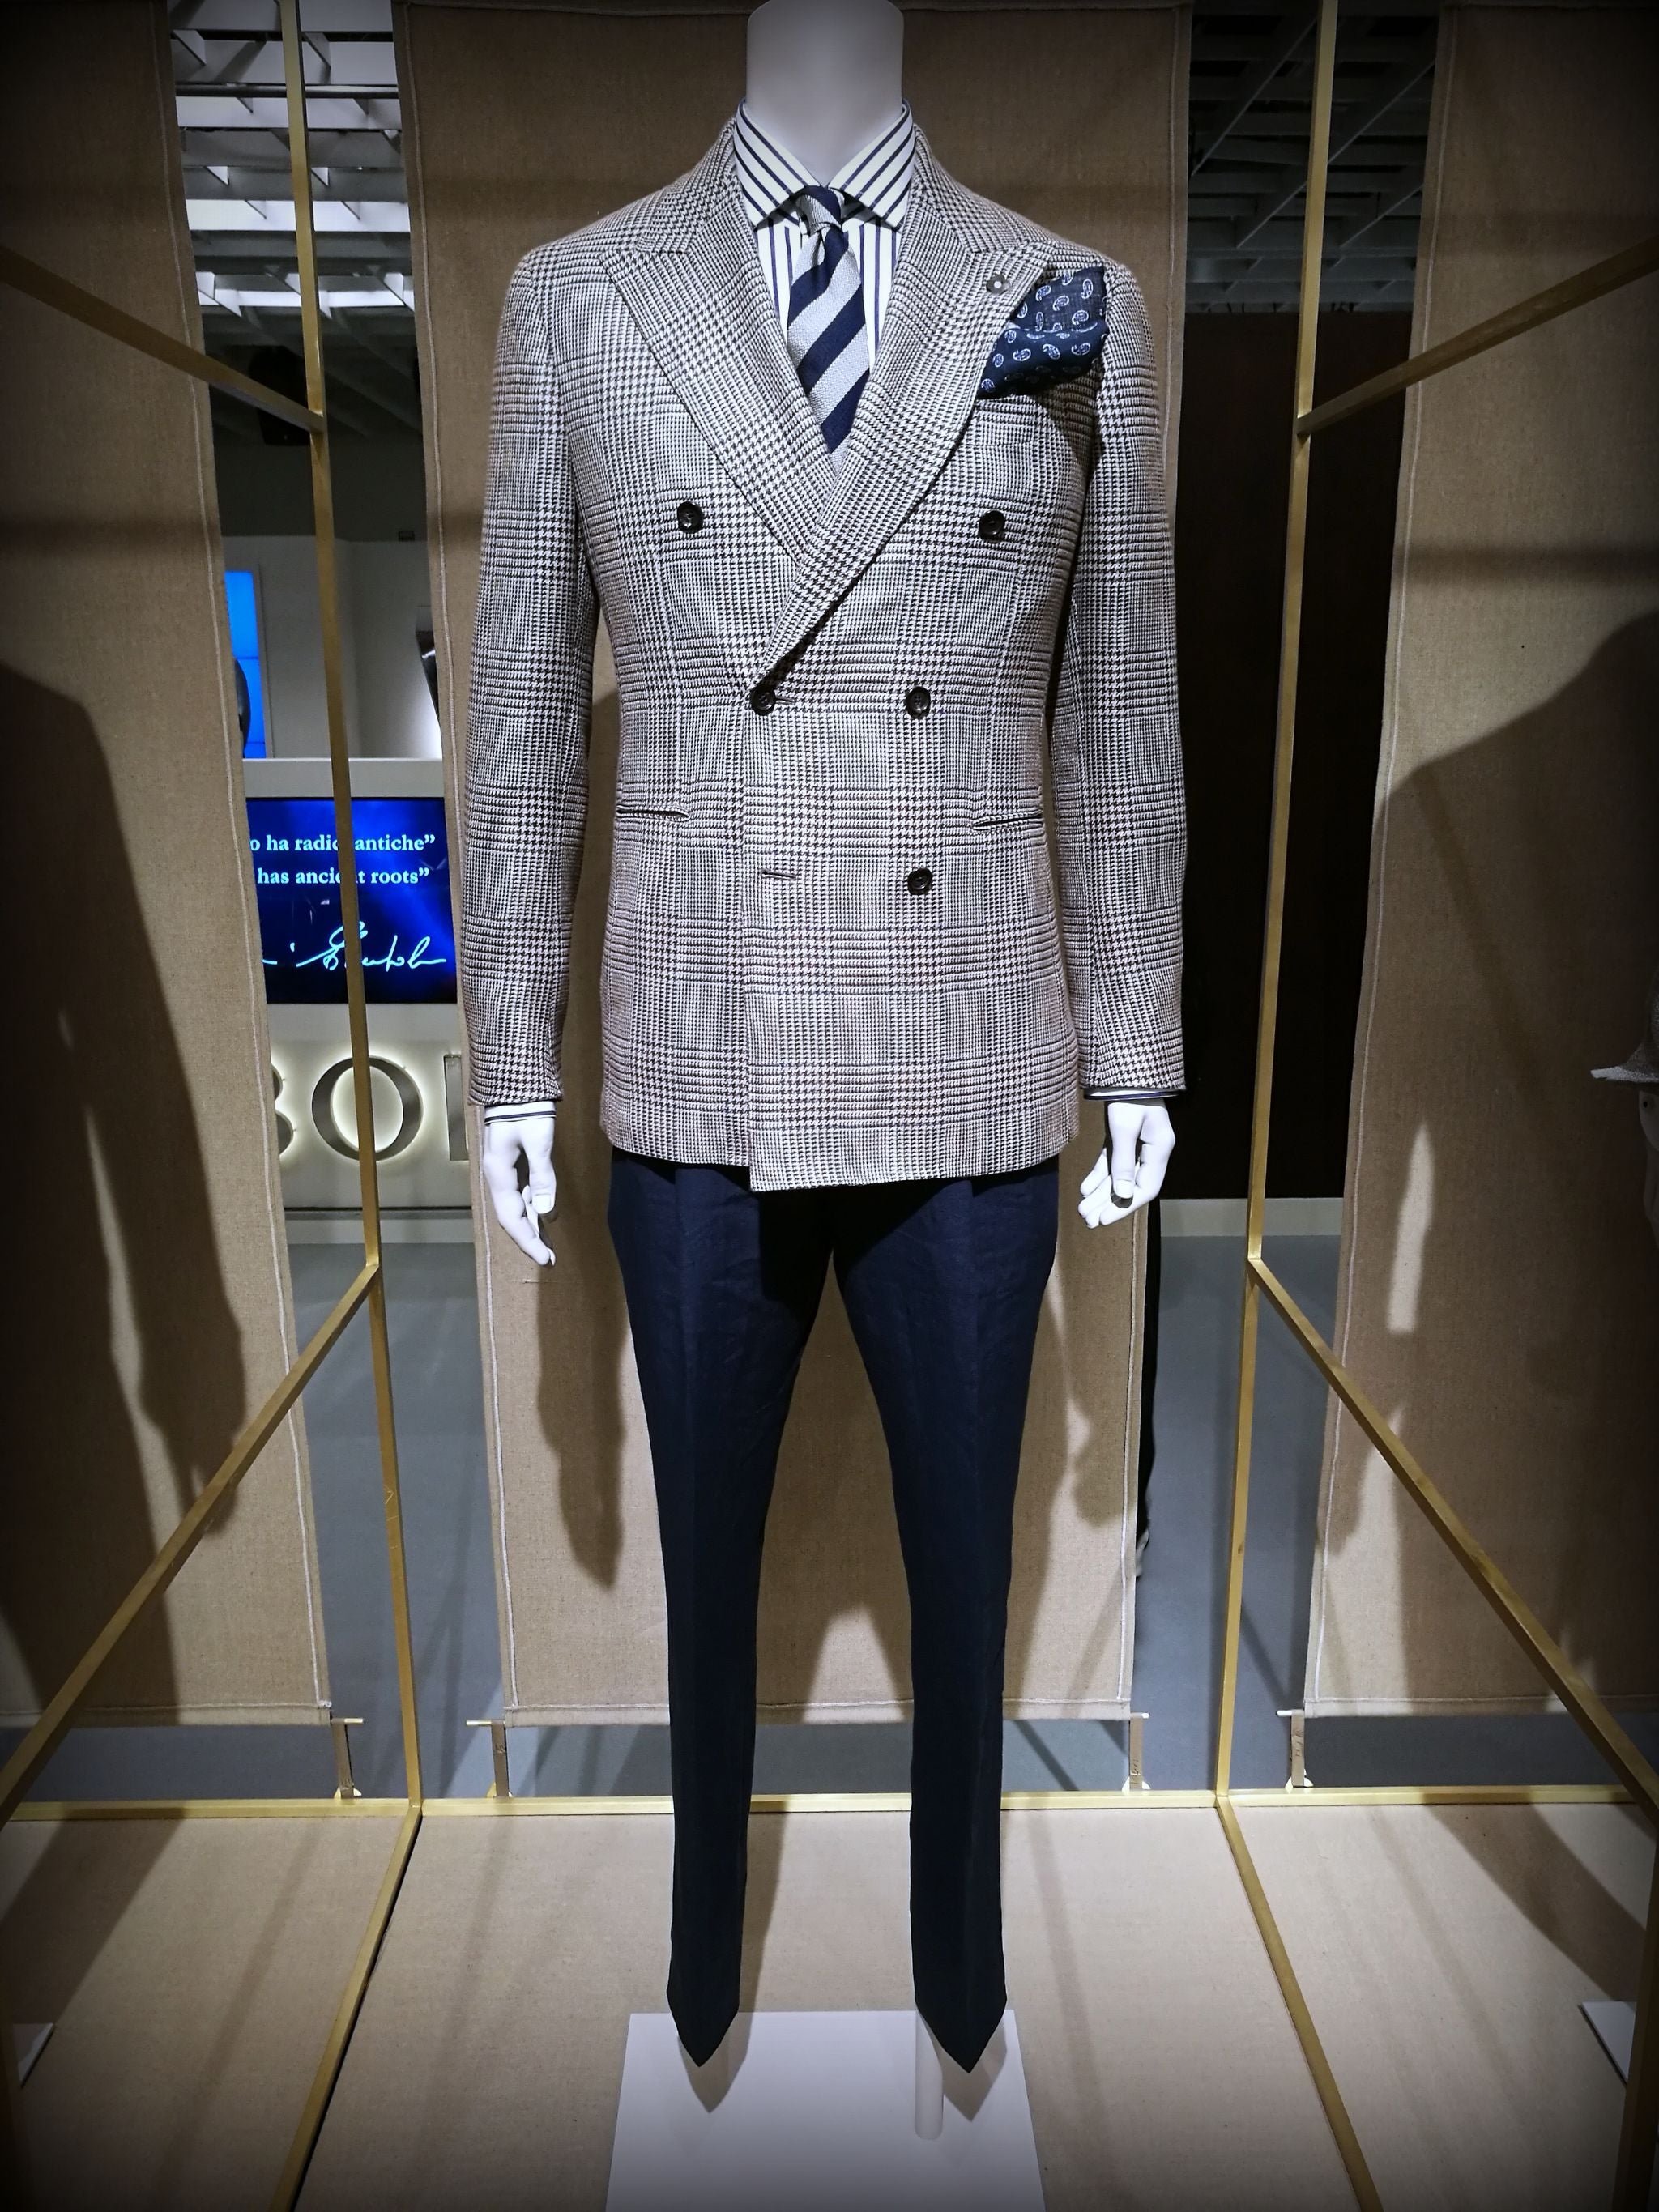 Pitti Uomo 90 - Double-breasted blazer with blue trousers by Lardini